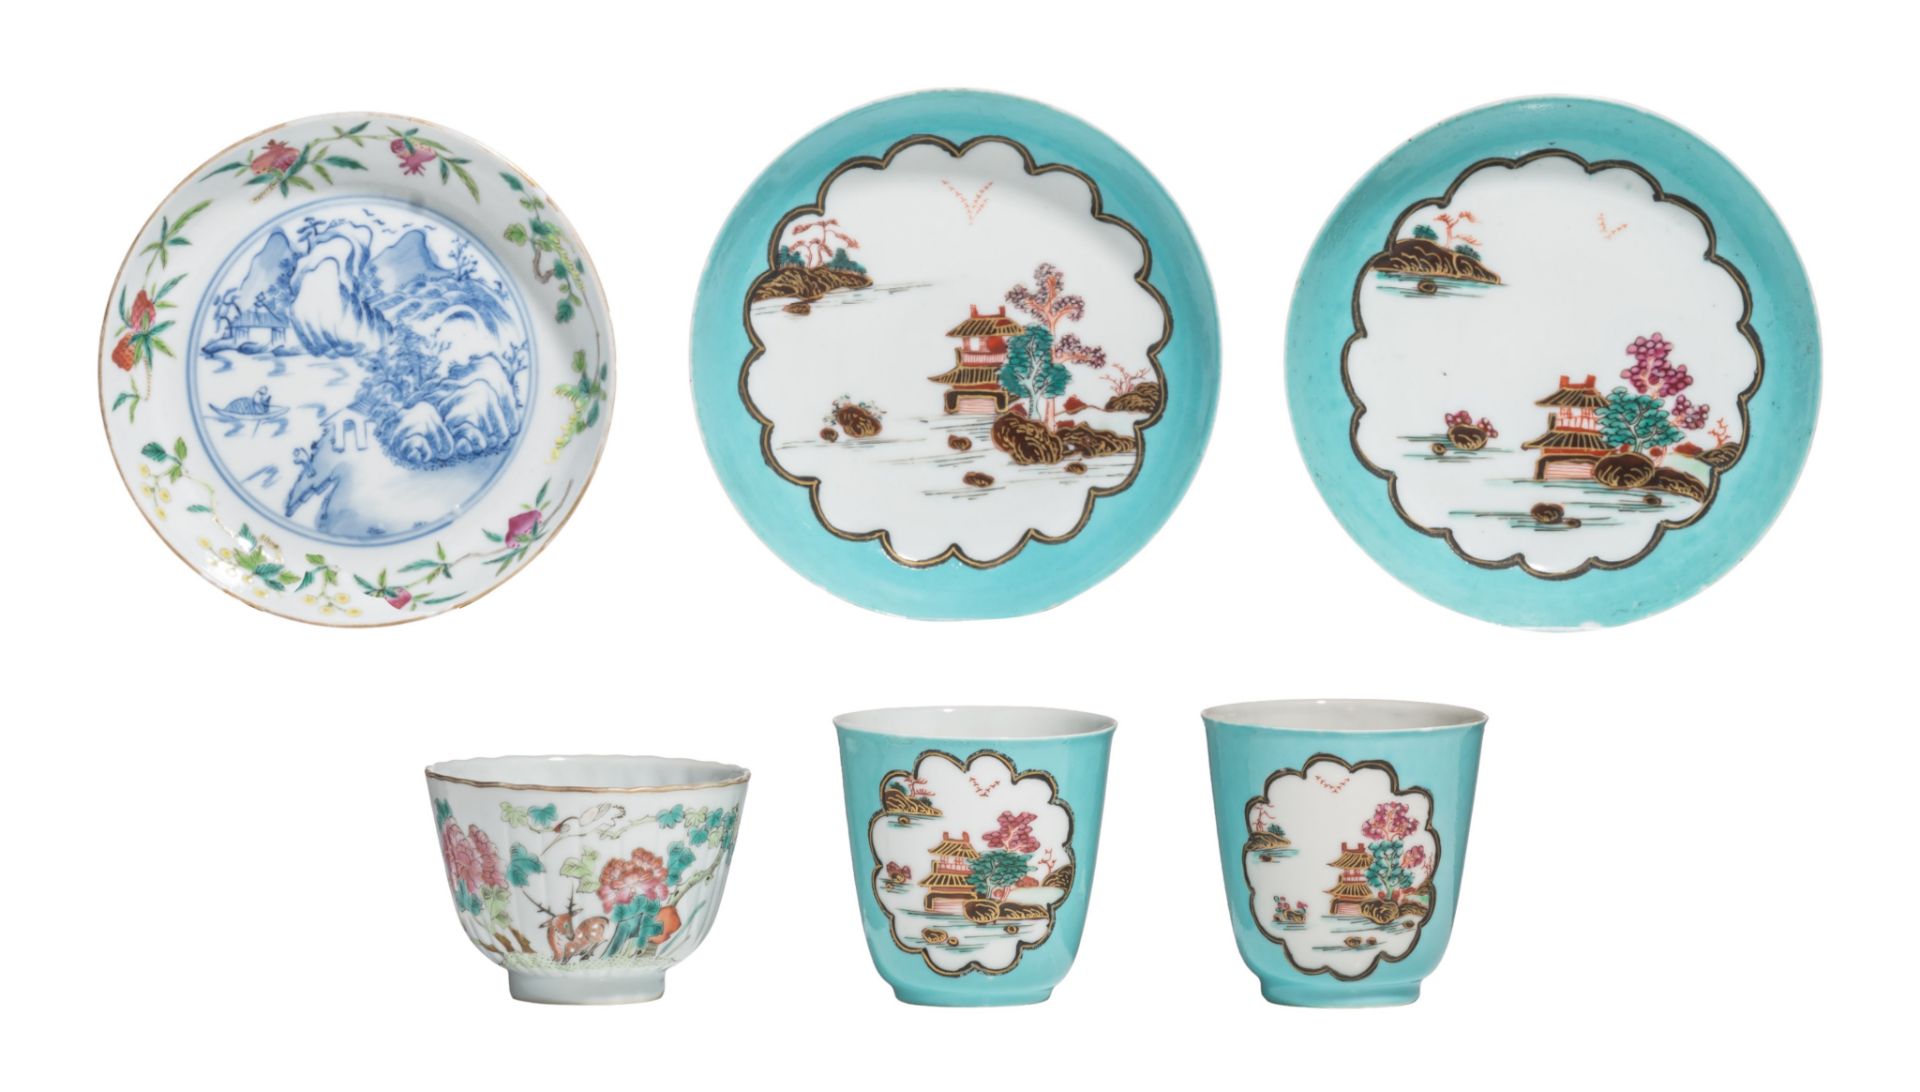 Two rare sets of Meissen-inspired Chinese export porcelain cups and saucers, 18thC, tallest H 7,5 cm